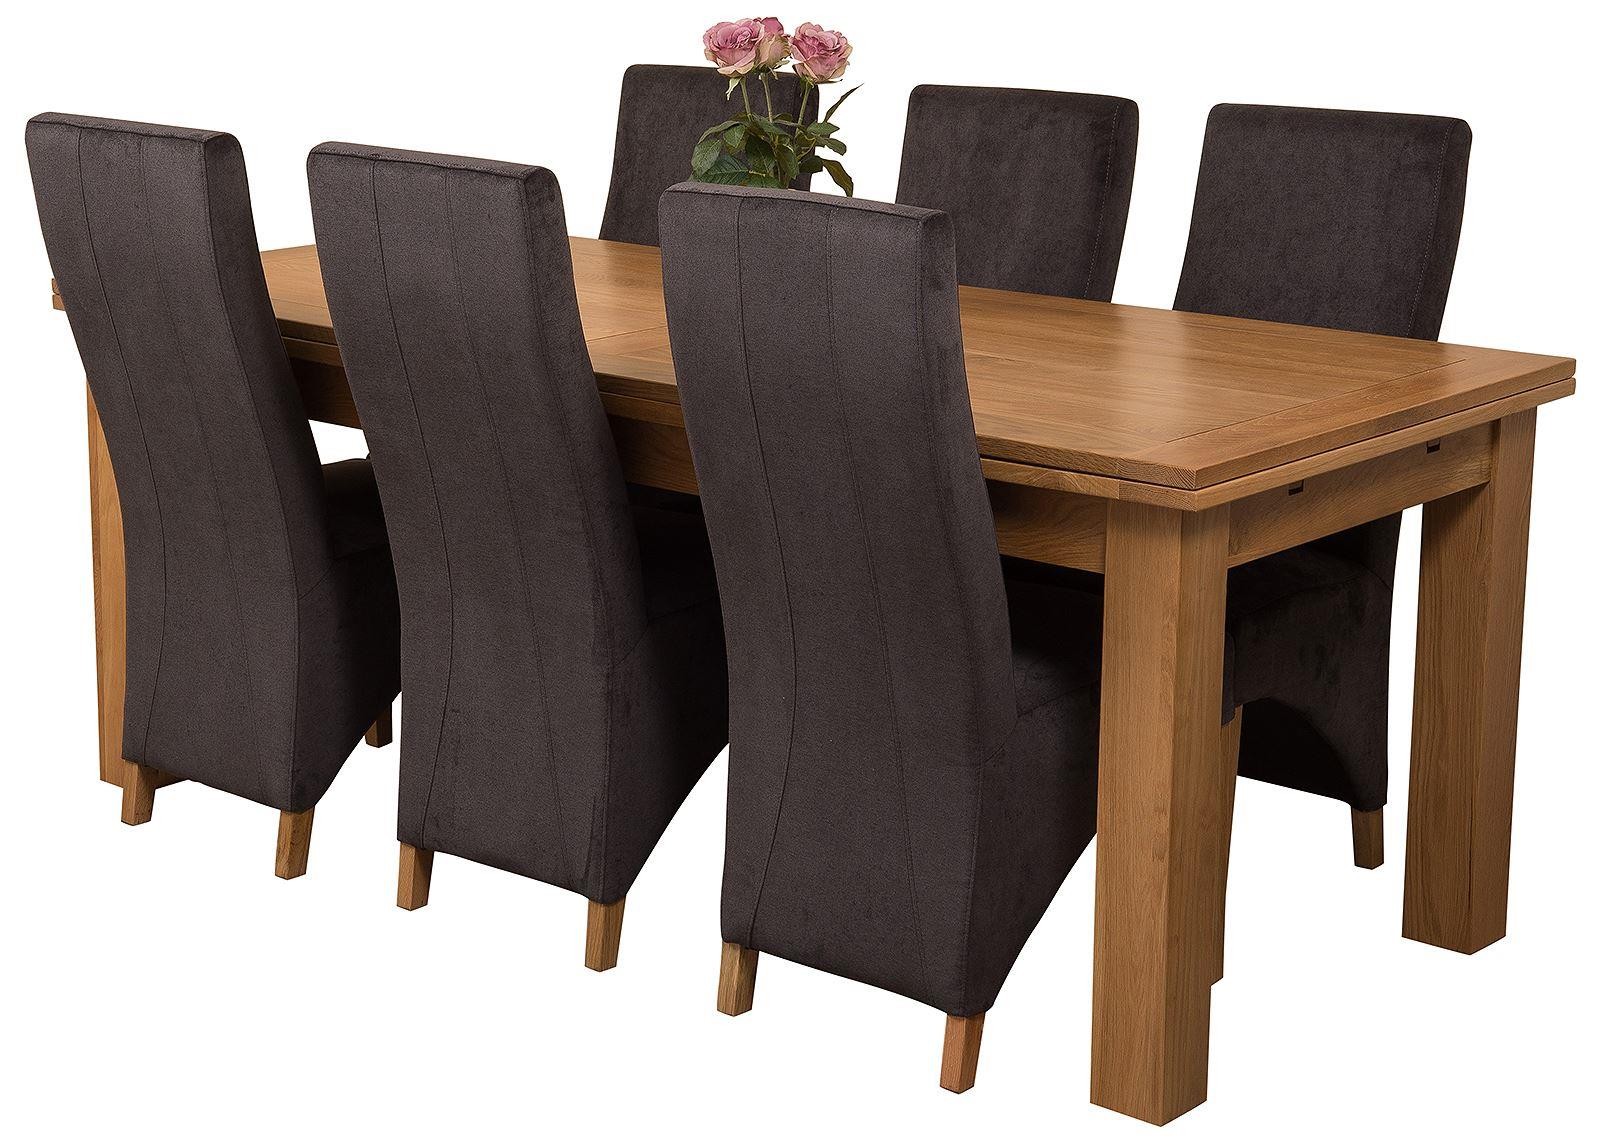 Richmond Solid Oak 200cm-280cm Extending Dining Table with 6 Lola Dining Chairs [Black Fabric]